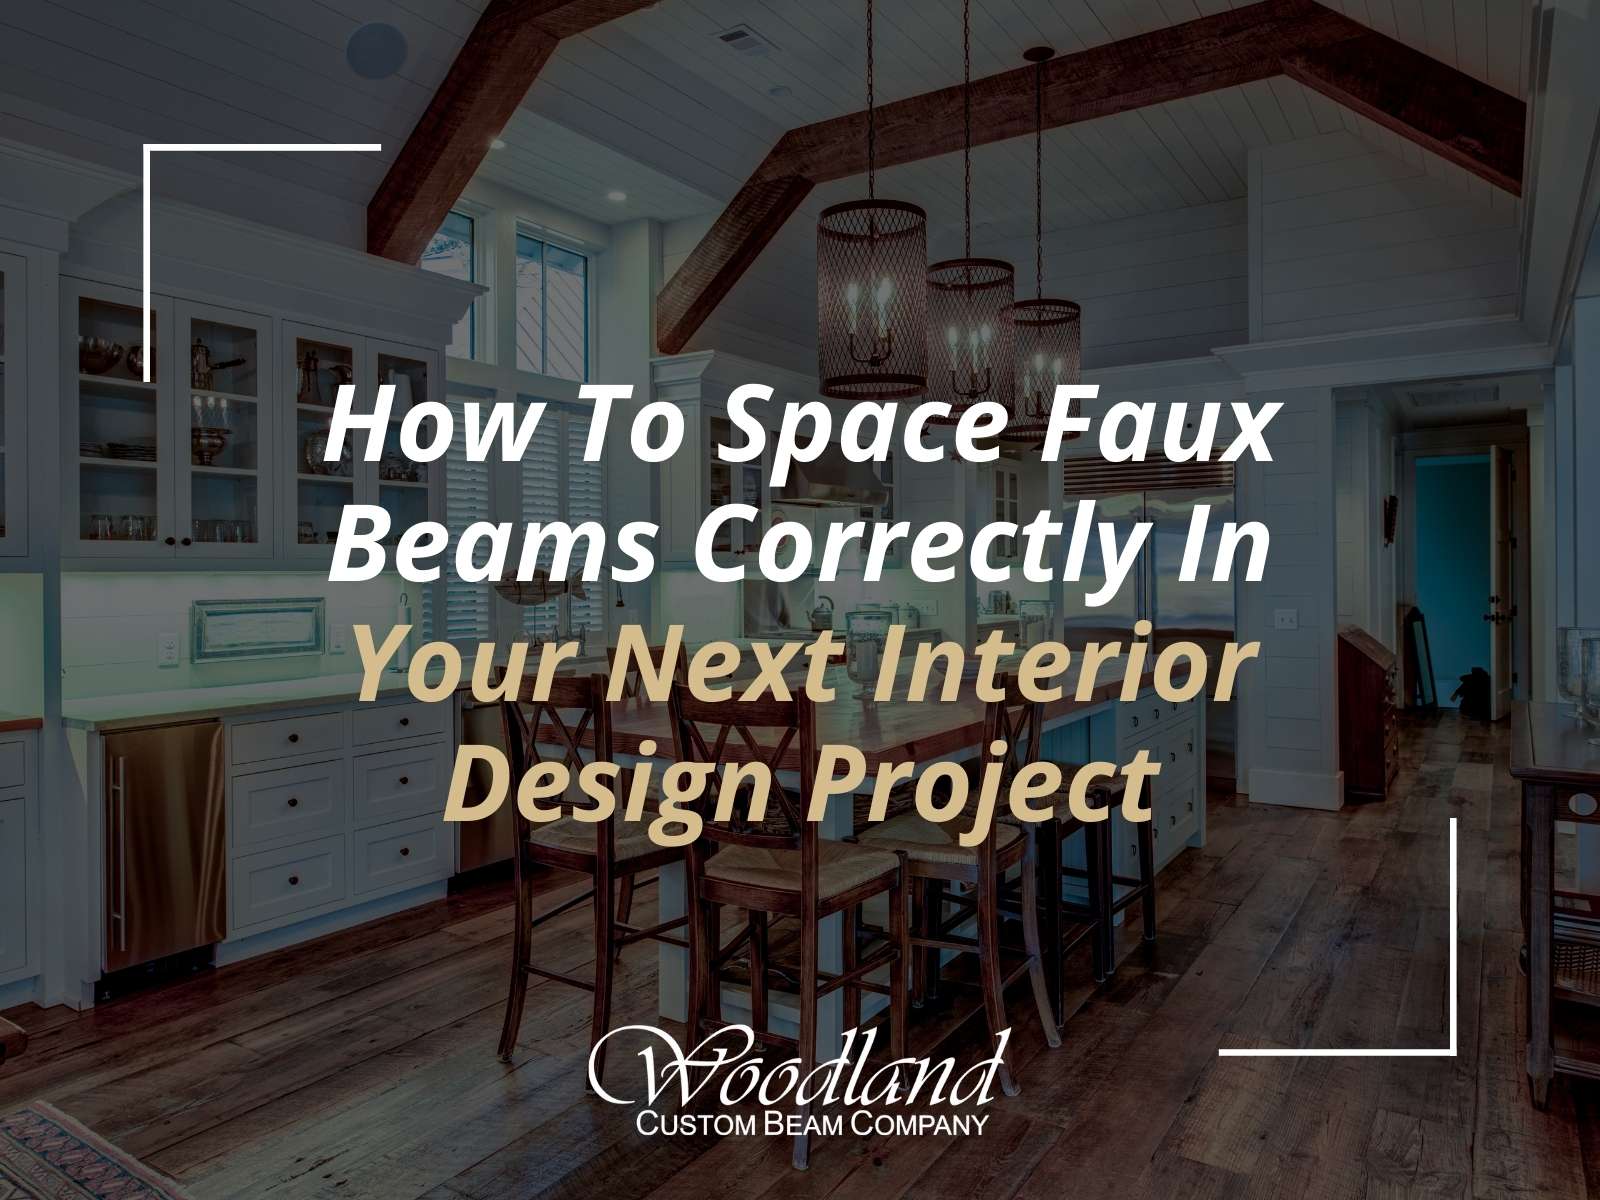 How To Space Faux Beams Correctly In Your Next Interior Design Project